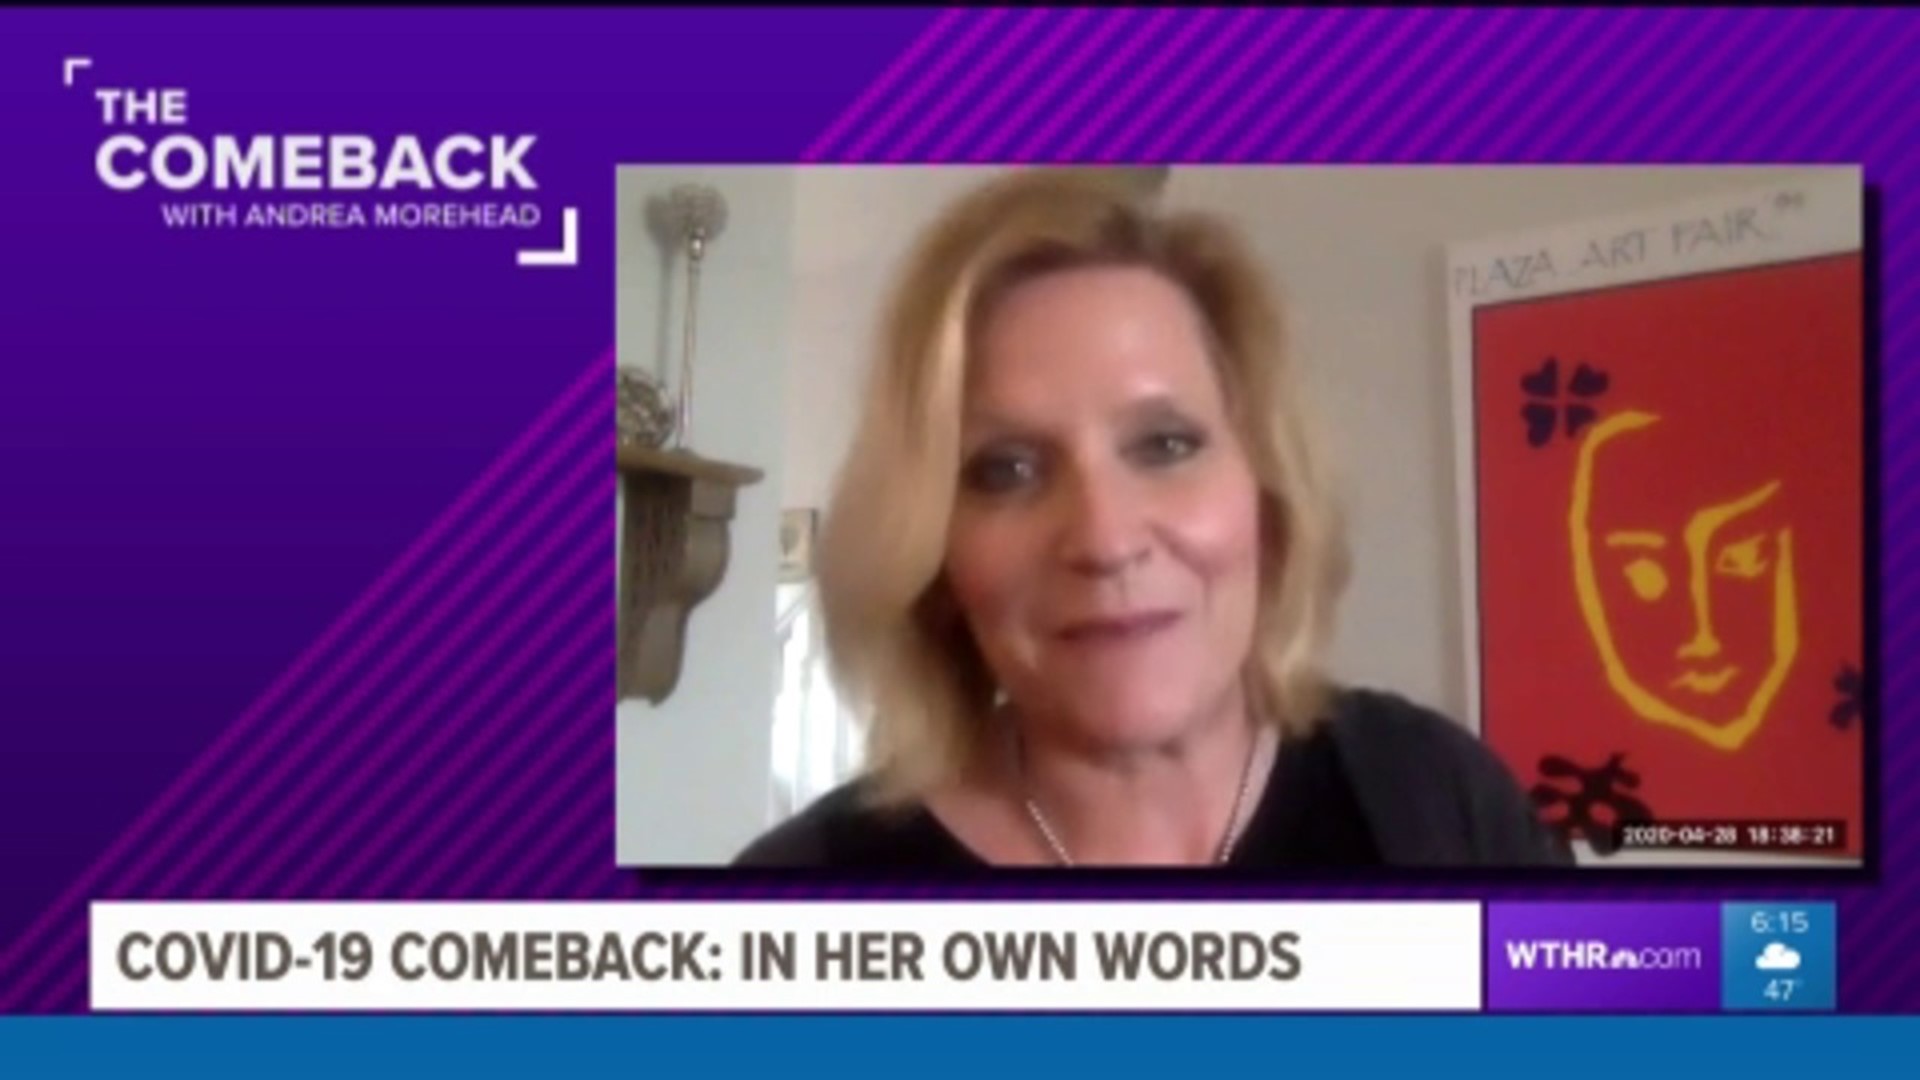 The Comeback - In her Own Words